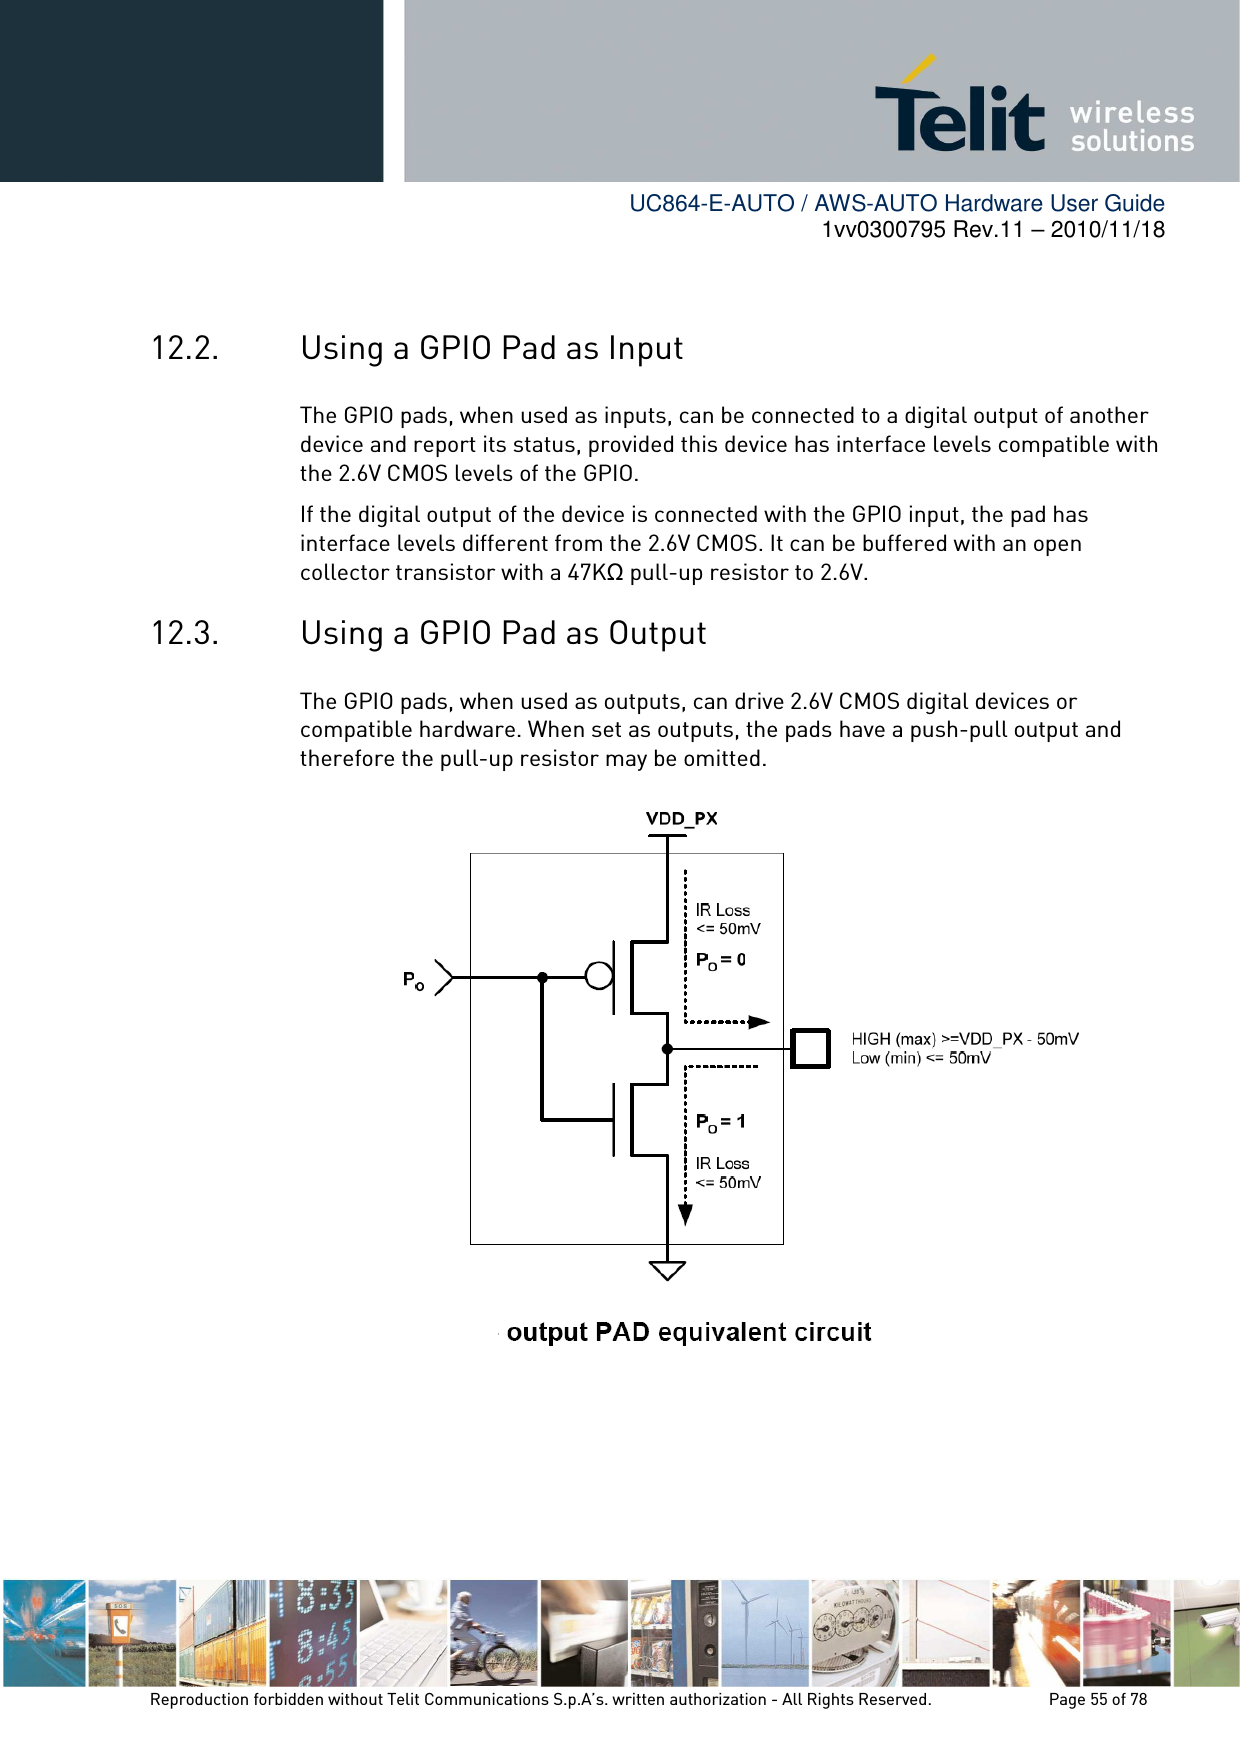        UC864-E-AUTO / AWS-AUTO Hardware User Guide 1vv0300795 Rev.11 – 2010/11/18     Reproduction forbidden without Telit Communications S.p.A’s. written authorization - All Rights Reserved.    Page 55 of 78   12.2. Using a GPIO Pad as Input The GPIO pads, when used as inputs, can be connected to a digital output of another device and report its status, provided this device has interface levels compatible with the 2.6V CMOS levels of the GPIO.  If the digital output of the device is connected with the GPIO input, the pad has interface levels different from the 2.6V CMOS. It can be buffered with an open collector transistor with a 47KΩ pull-up resistor to 2.6V. 12.3. Using a GPIO Pad as Output The GPIO pads, when used as outputs, can drive 2.6V CMOS digital devices or compatible hardware. When set as outputs, the pads have a push-pull output and therefore the pull-up resistor may be omitted.  